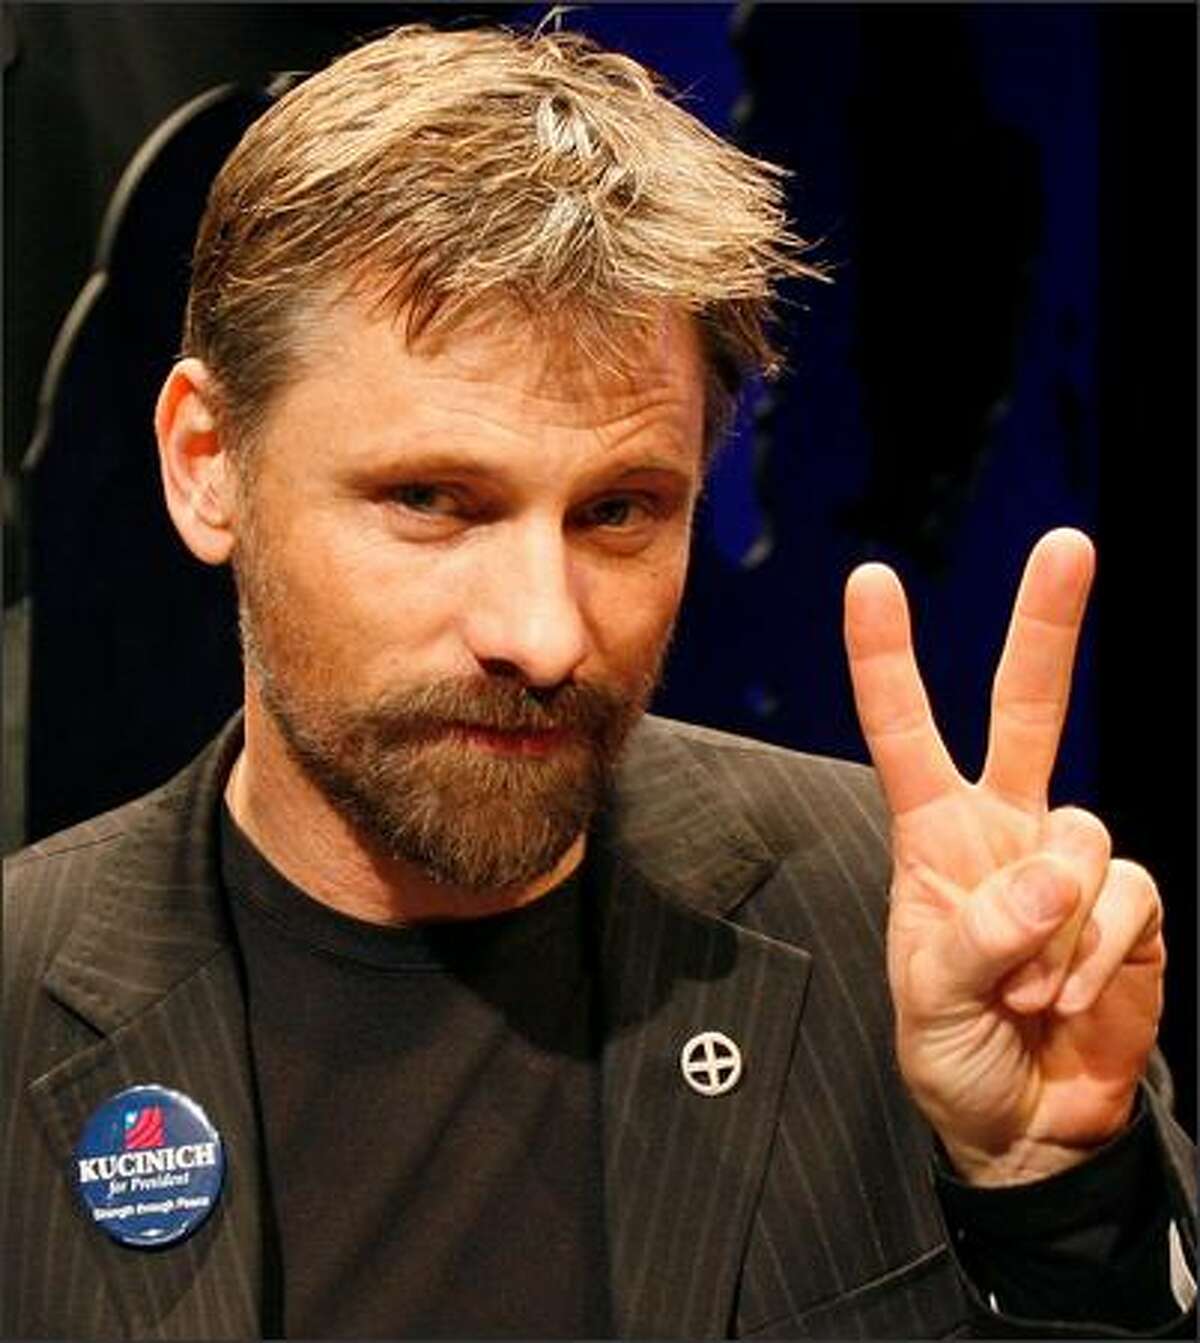 Actor Viggo Mortensen makes a peace sign before the start of a panel discussion about an upcoming mini-series entitled "The People Speak", Jan. 9, 2008, at Emerson College in Boston. Production of the series, which is an adaptation of the book by Howard Zinn, began in Boston on Jan. 8 and will continue throughout the Spring. (AP Photo/Michael Dwyer)